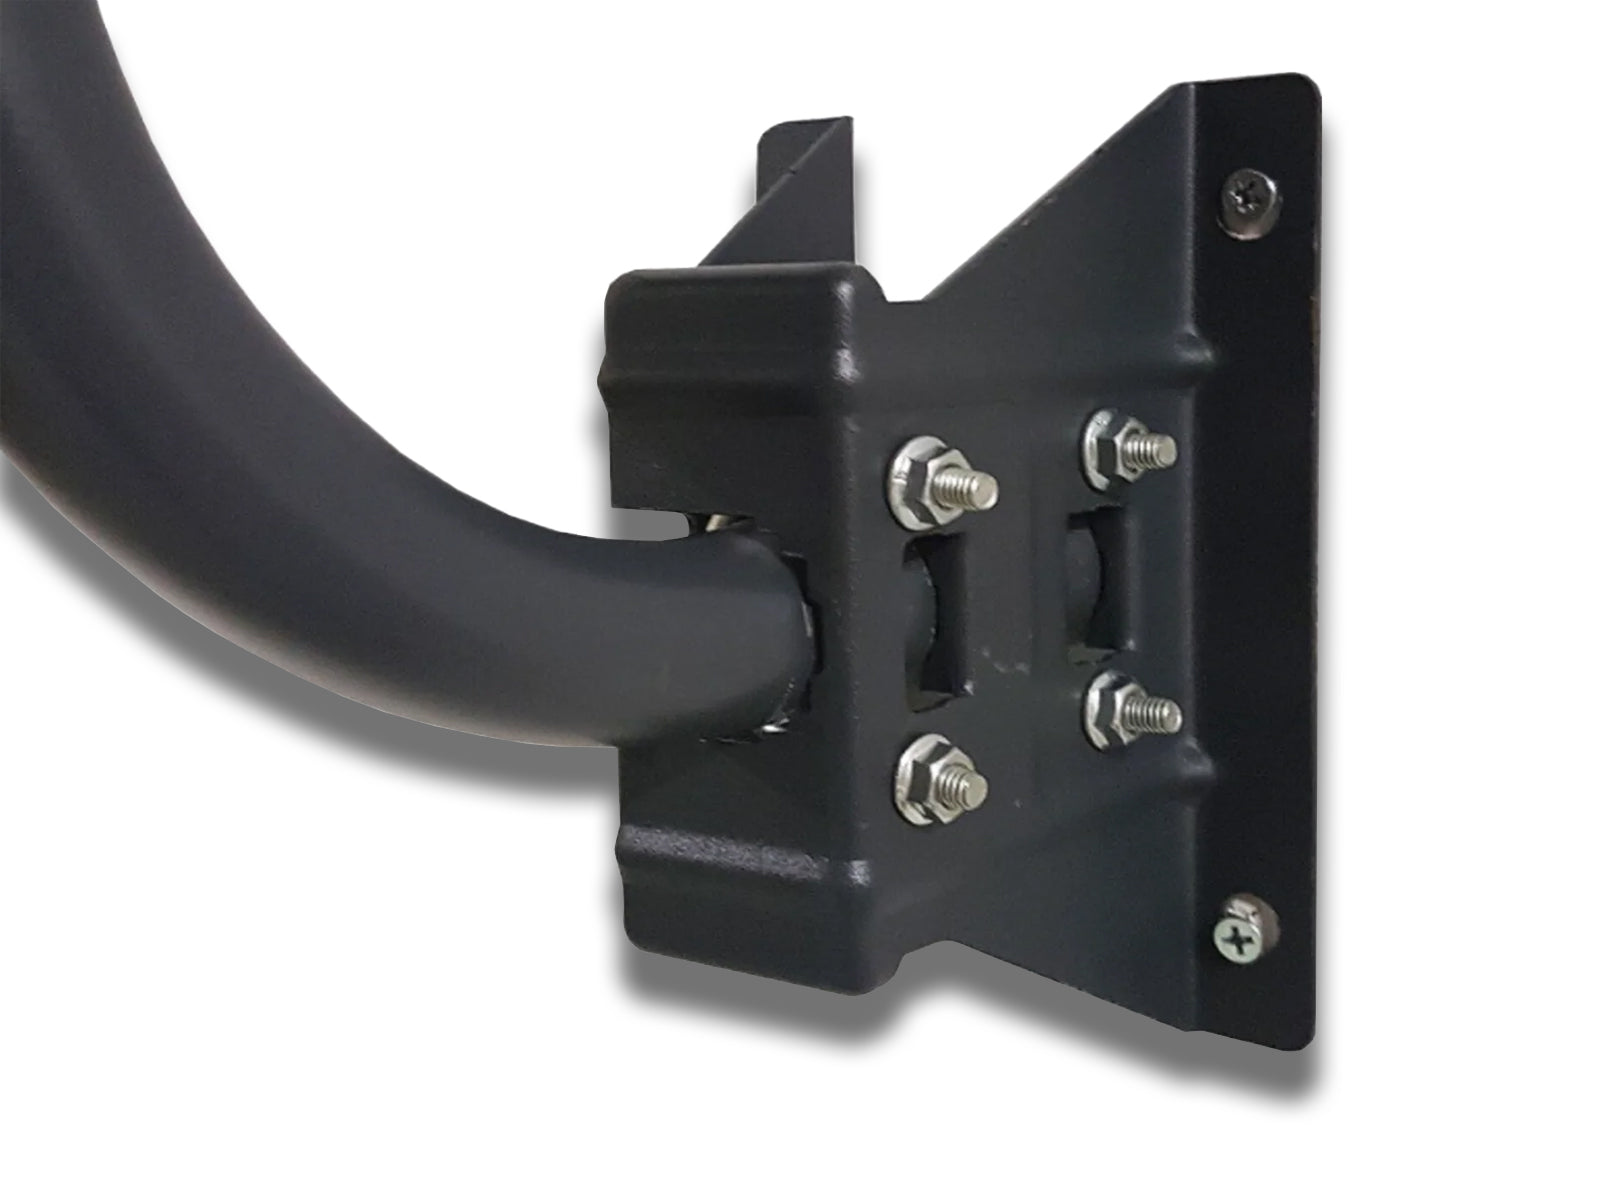 Close-up-image-view-of-the-mounting-of-the-satellite-dish-wall-mounting-bracket-on-the-white-background